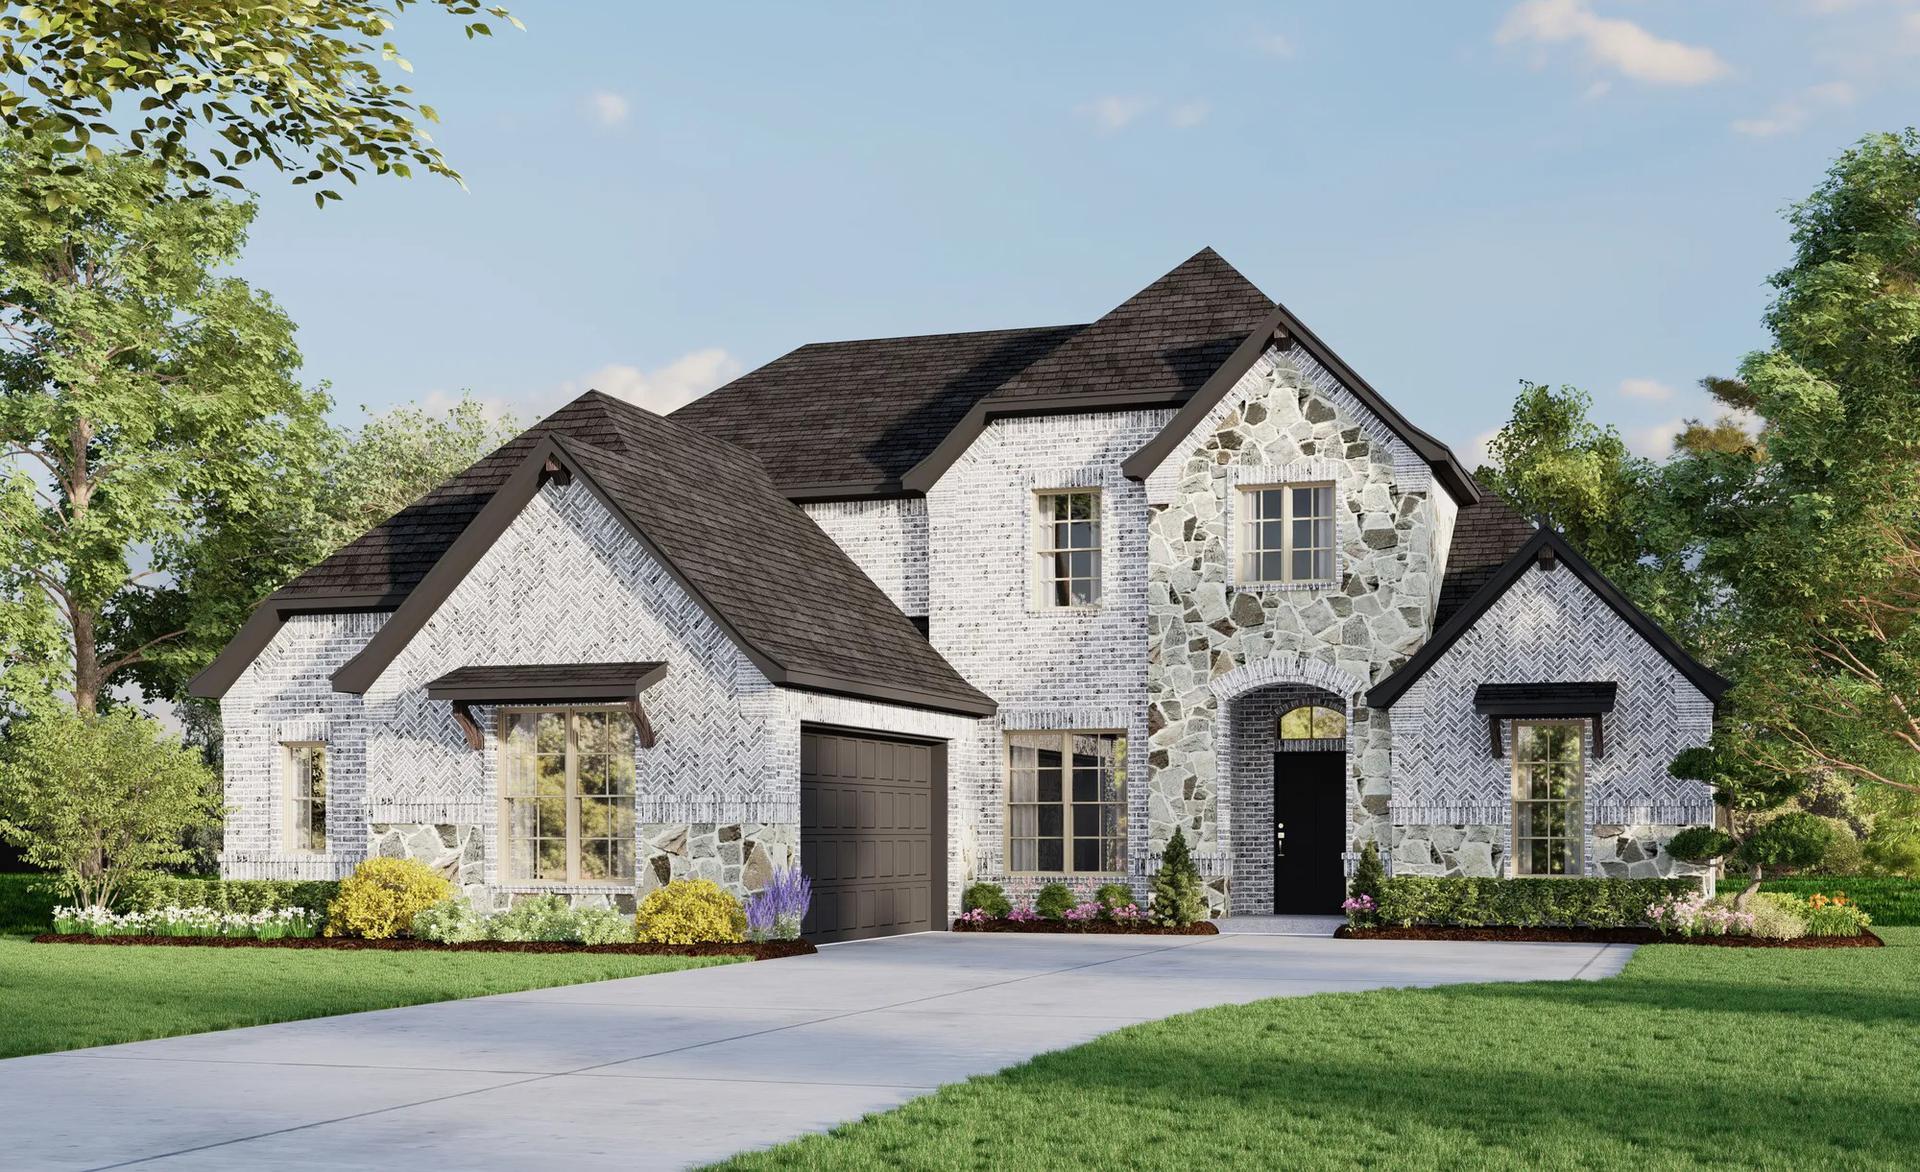 2972 C Stone. Concept 2972 Home with 4 Bedrooms